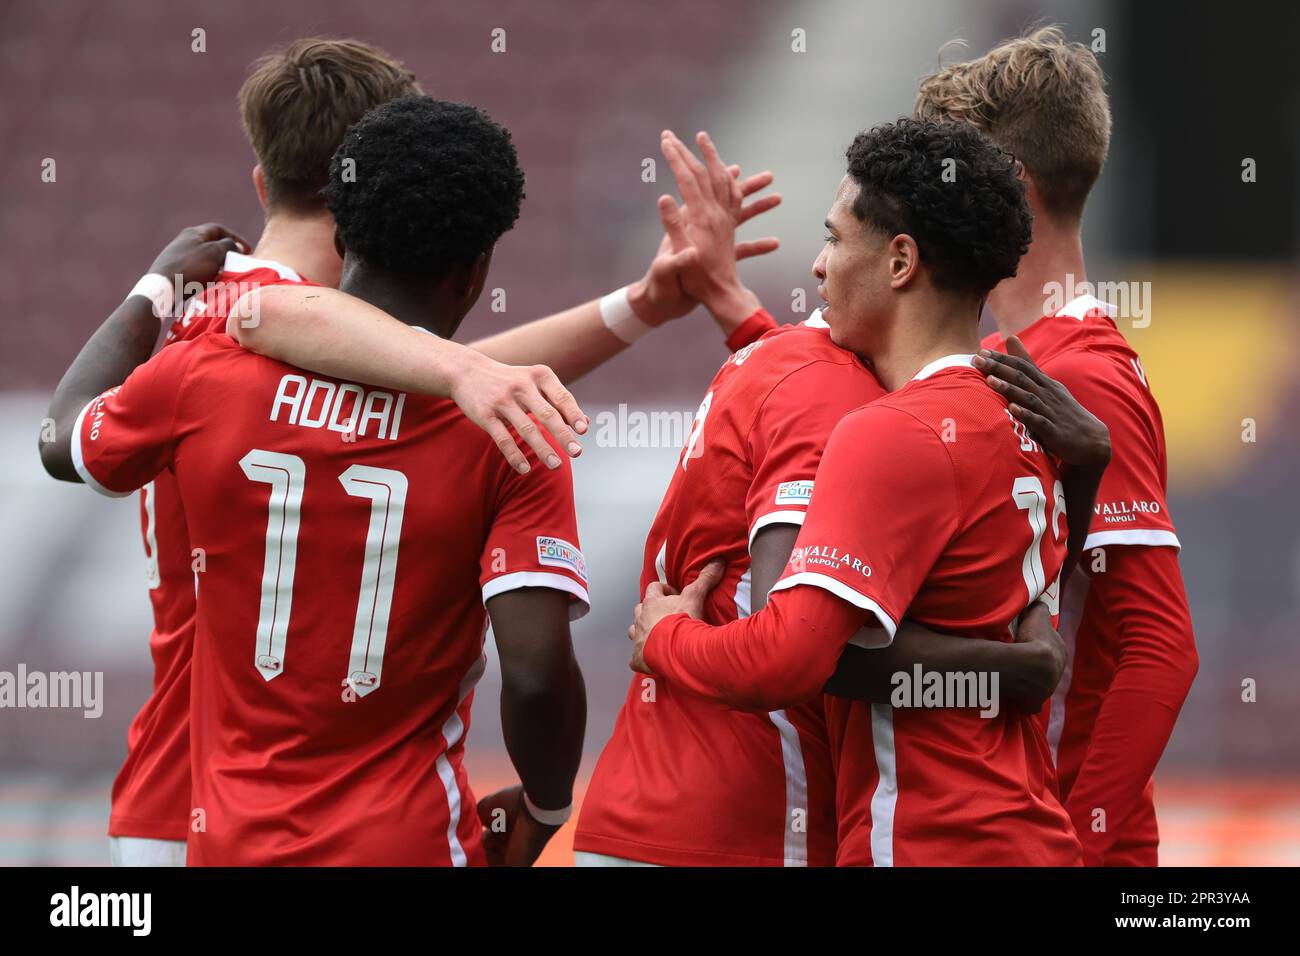 Geneva, Switzerland, 21st April 2023. Ro-Zangelo Daal of AZ Alkmaar  celebrates with team mates after scoring to give the side a 2-1 lead during  the UEFA Youth League match at Stade De